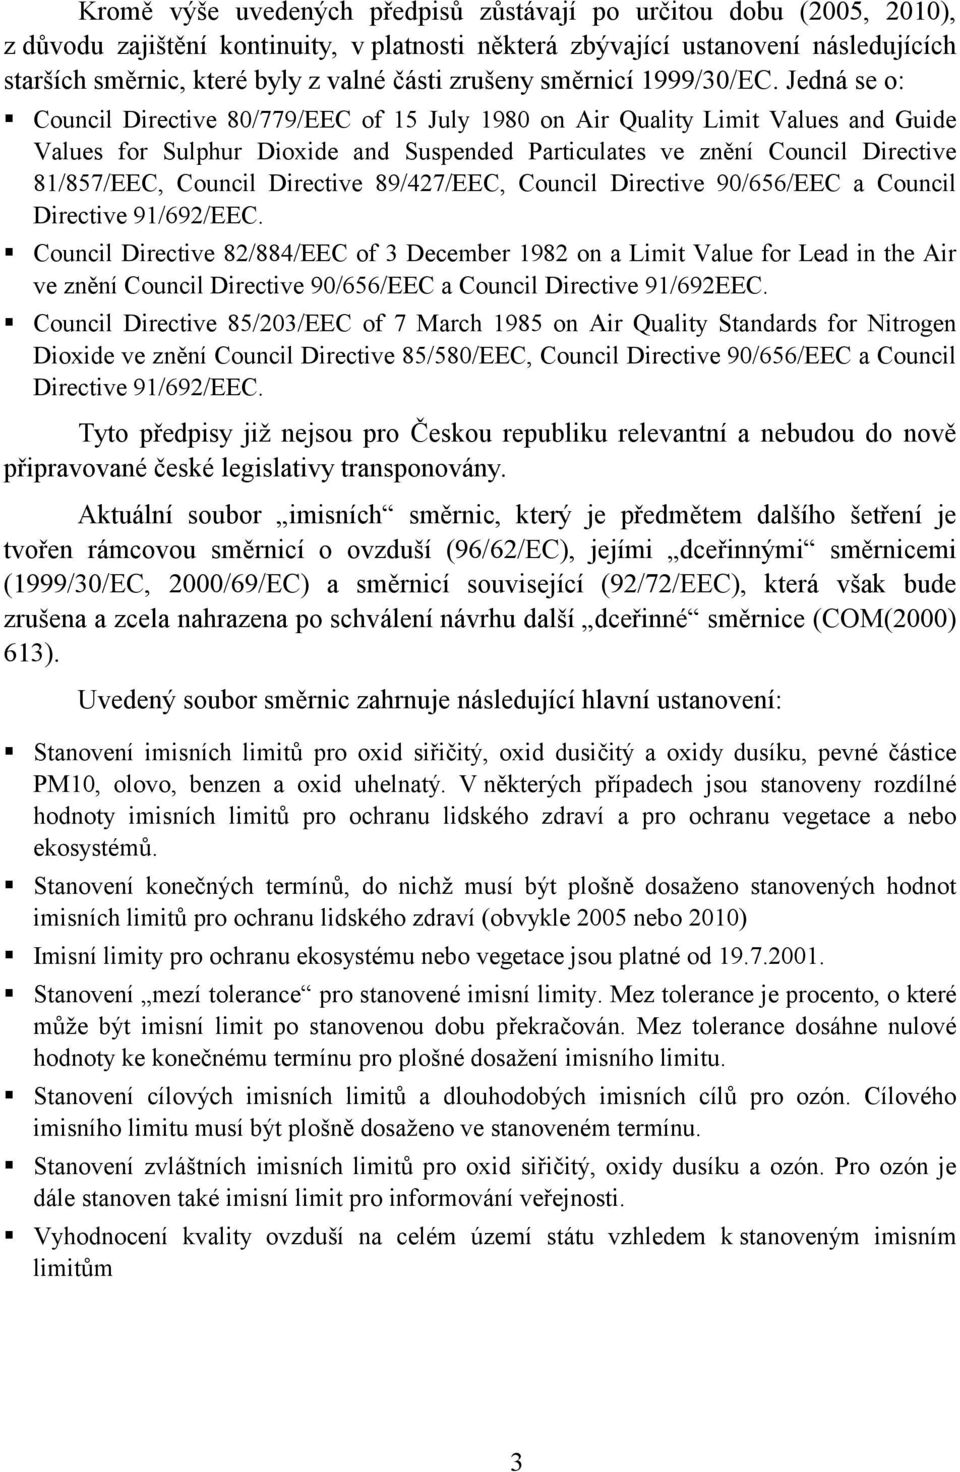 Council Directive 80/779/EEC of 15 July 1980 on Air Quality Limit Values and Guide Values for Sulphur Dioxide and Suspended Particulates ve znění Council Directive 81/857/EEC, Council Directive